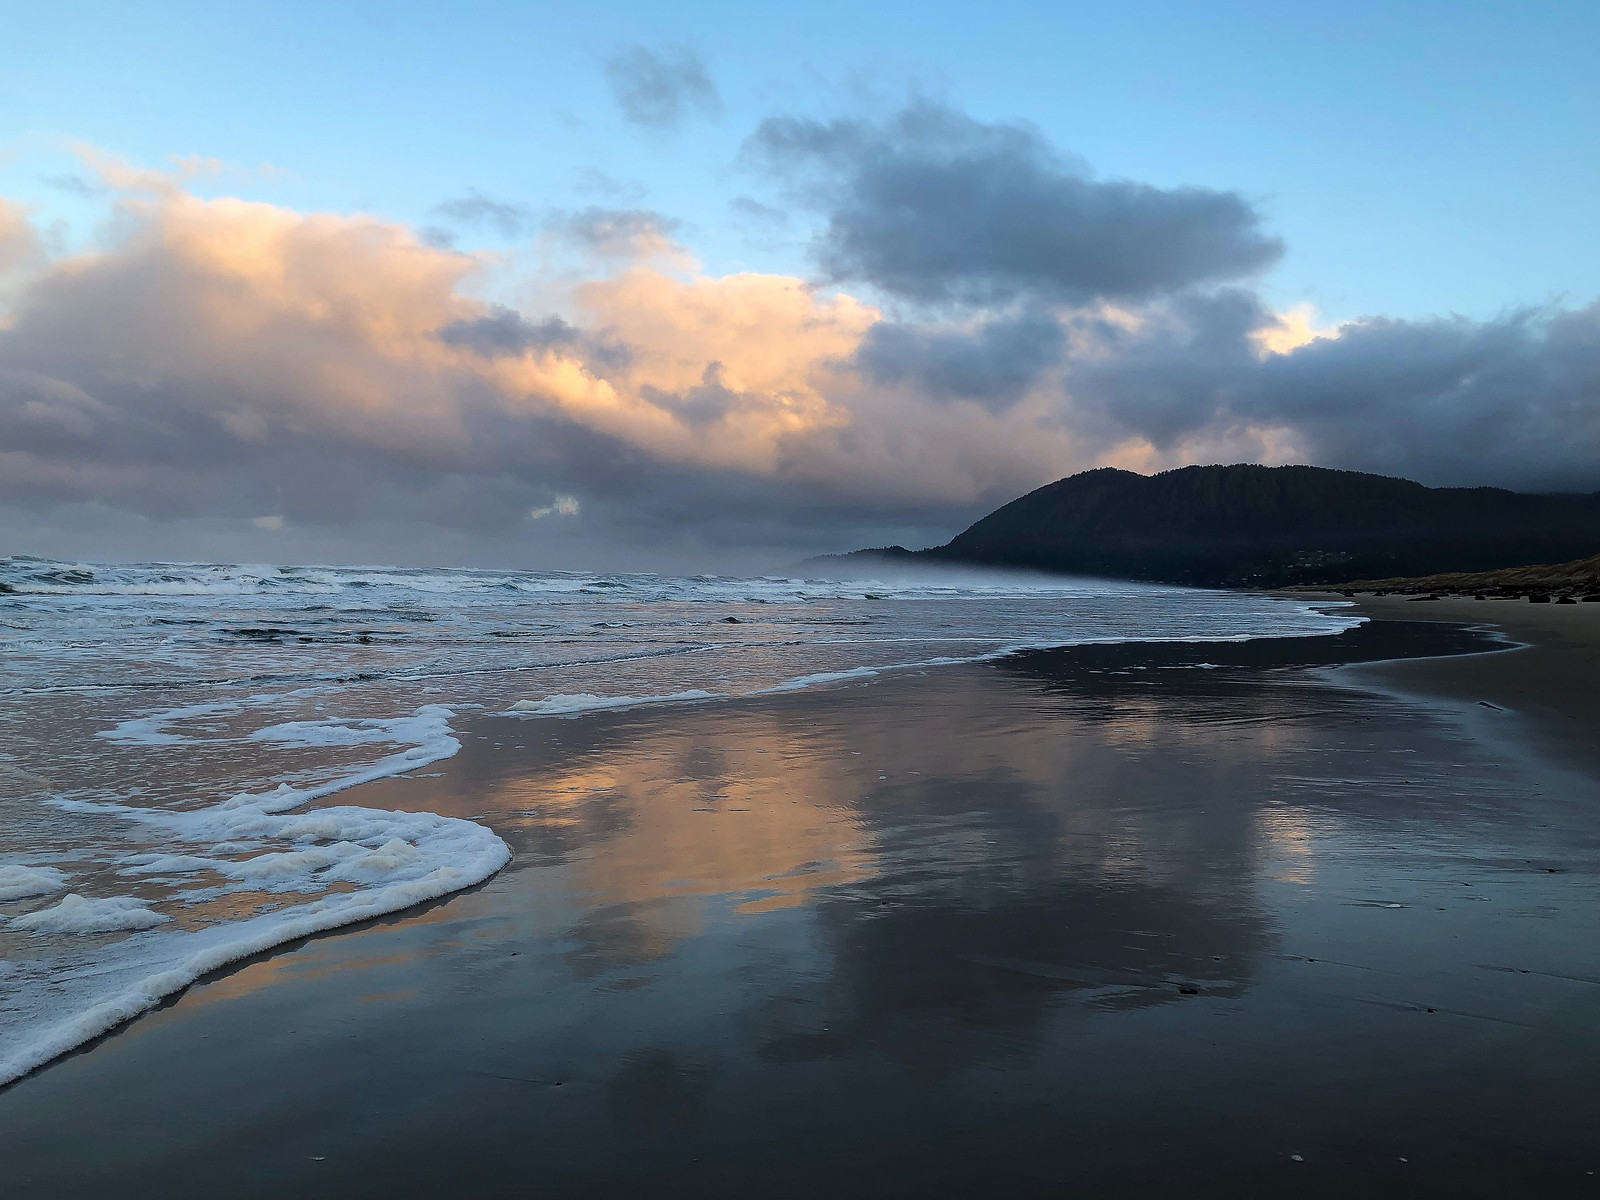 View to the north. Neahkahnie Mountain on the right background, surf and swash stretching to the left. Gray and peachy morning clouds reflected in the mirror.